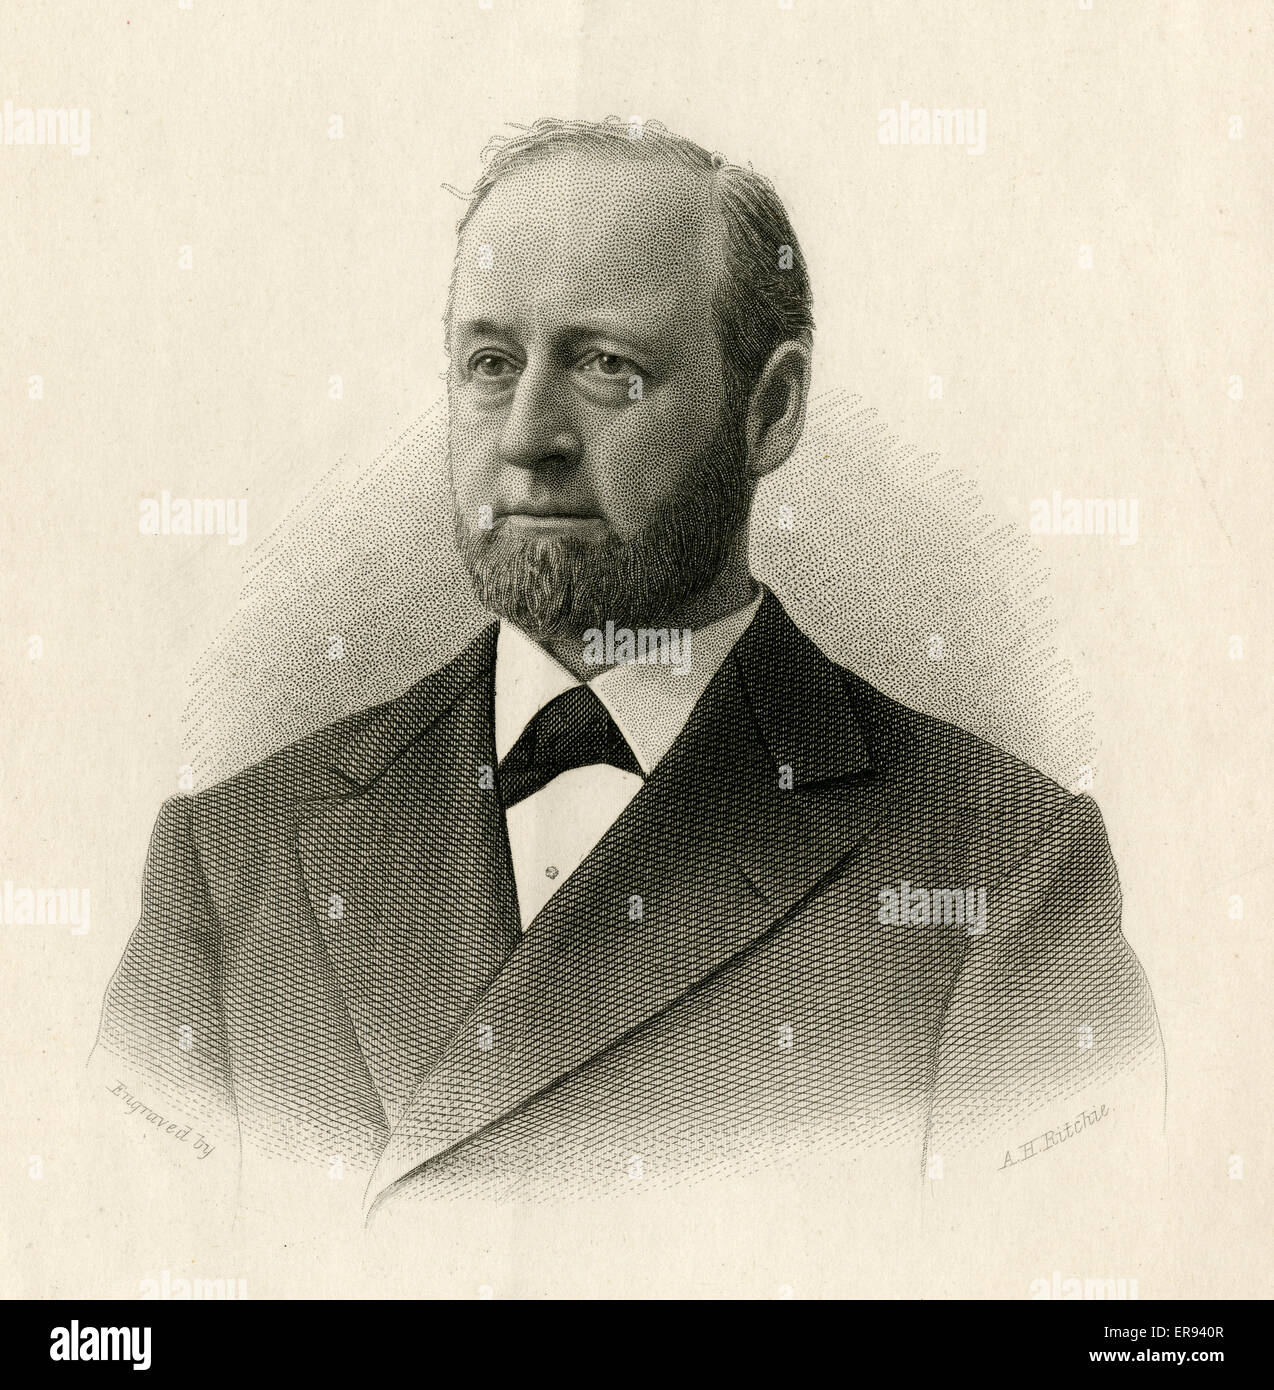 Antique 1882 engraving, Anson Stager. Anson Stager (1825-1885) was the co-founder of Western Union, the first president of Western Electric Manufacturing Company and Union Army general, where he was head of the Military Telegraph Department during the Civil War. Stock Photo